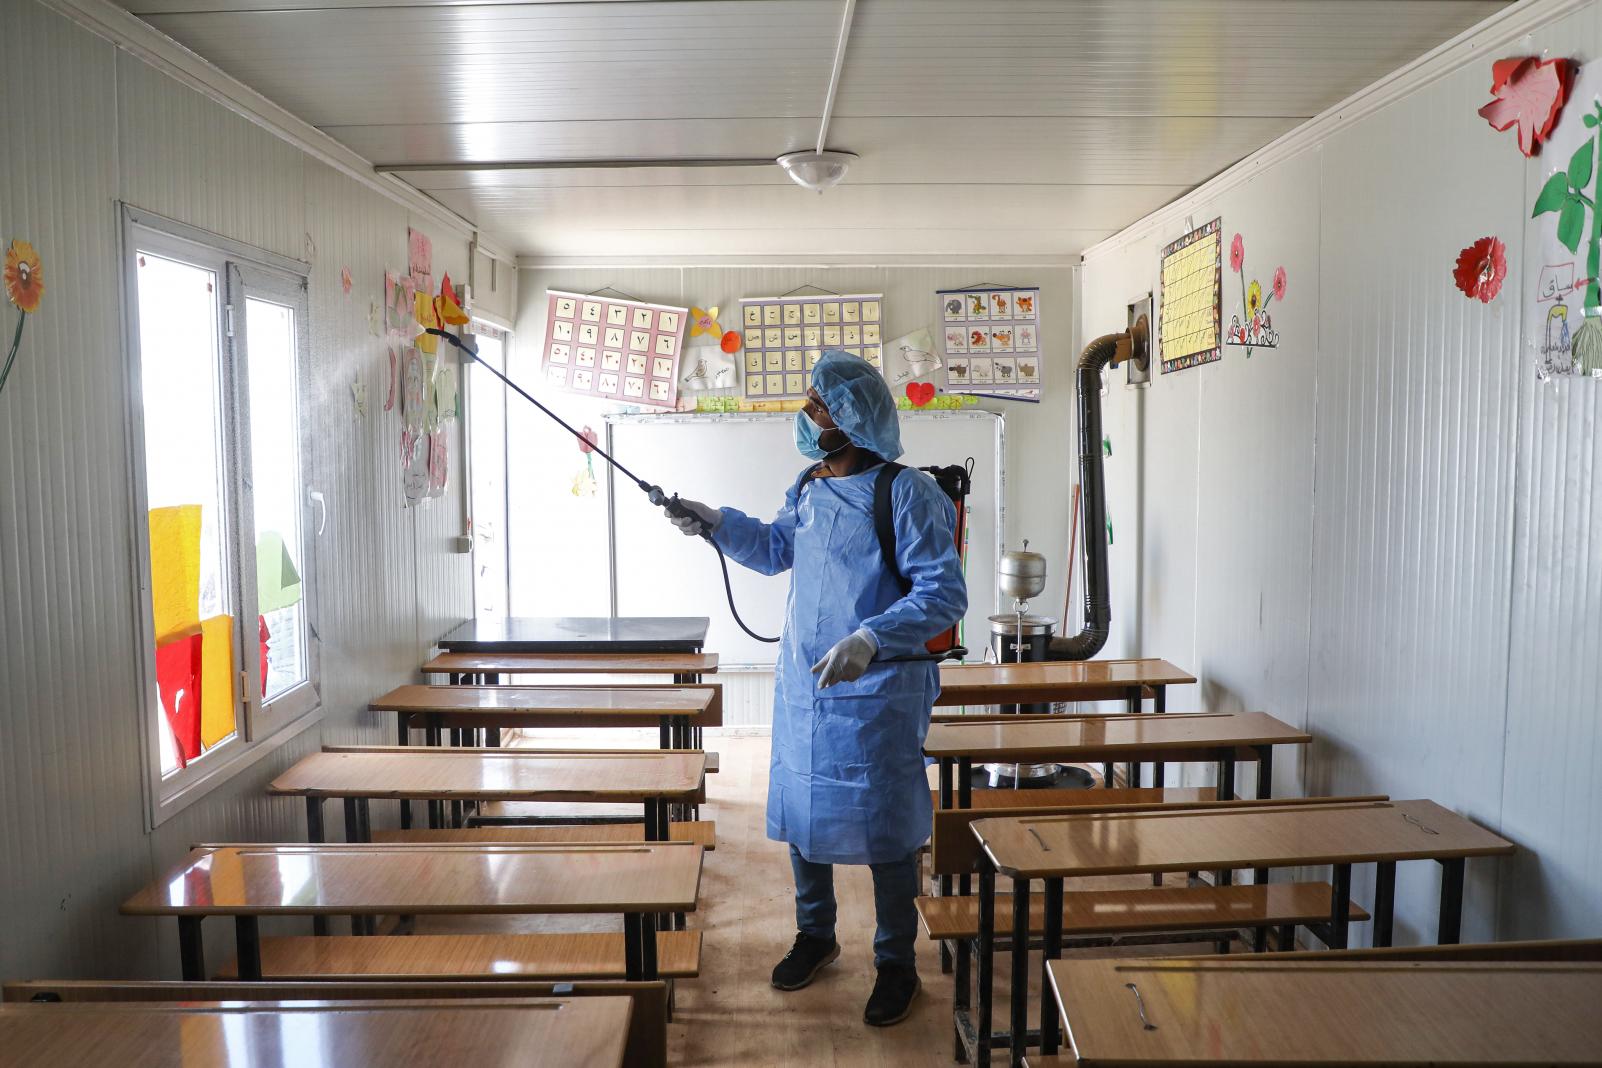  A man disinfecting an empty classroom once the school was closed.